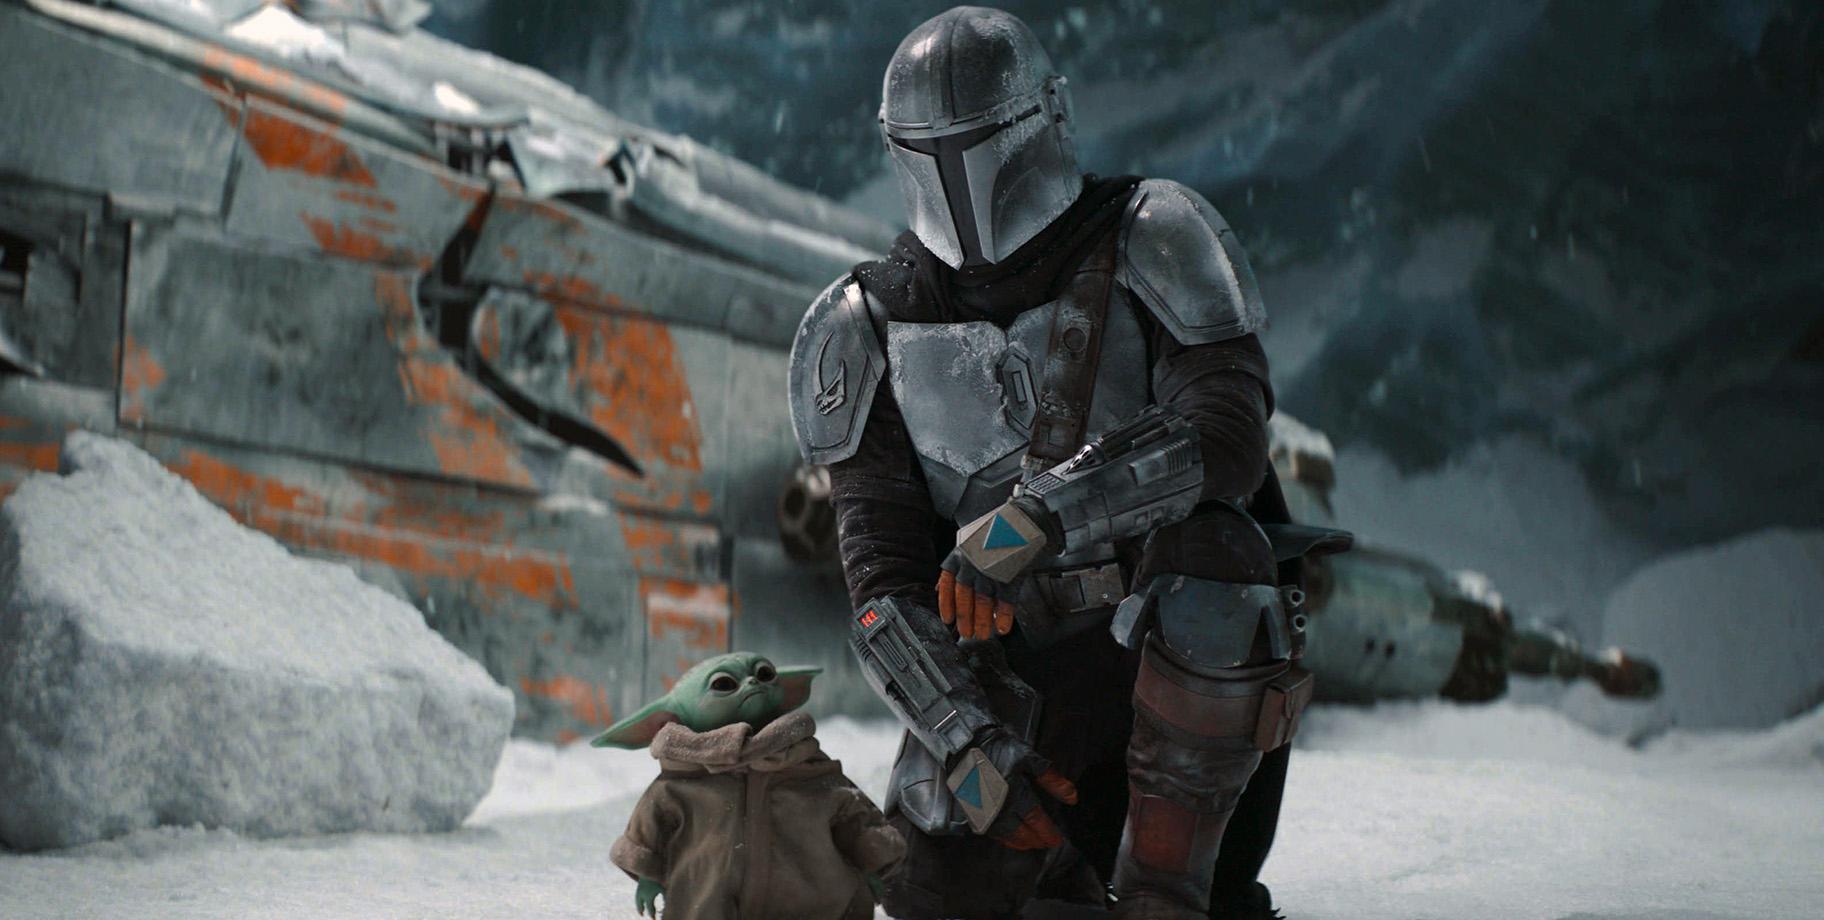 This image released by Disney+ shows Pedro Pascal in a scene from “The Mandalorian.” (Disney+ via AP)